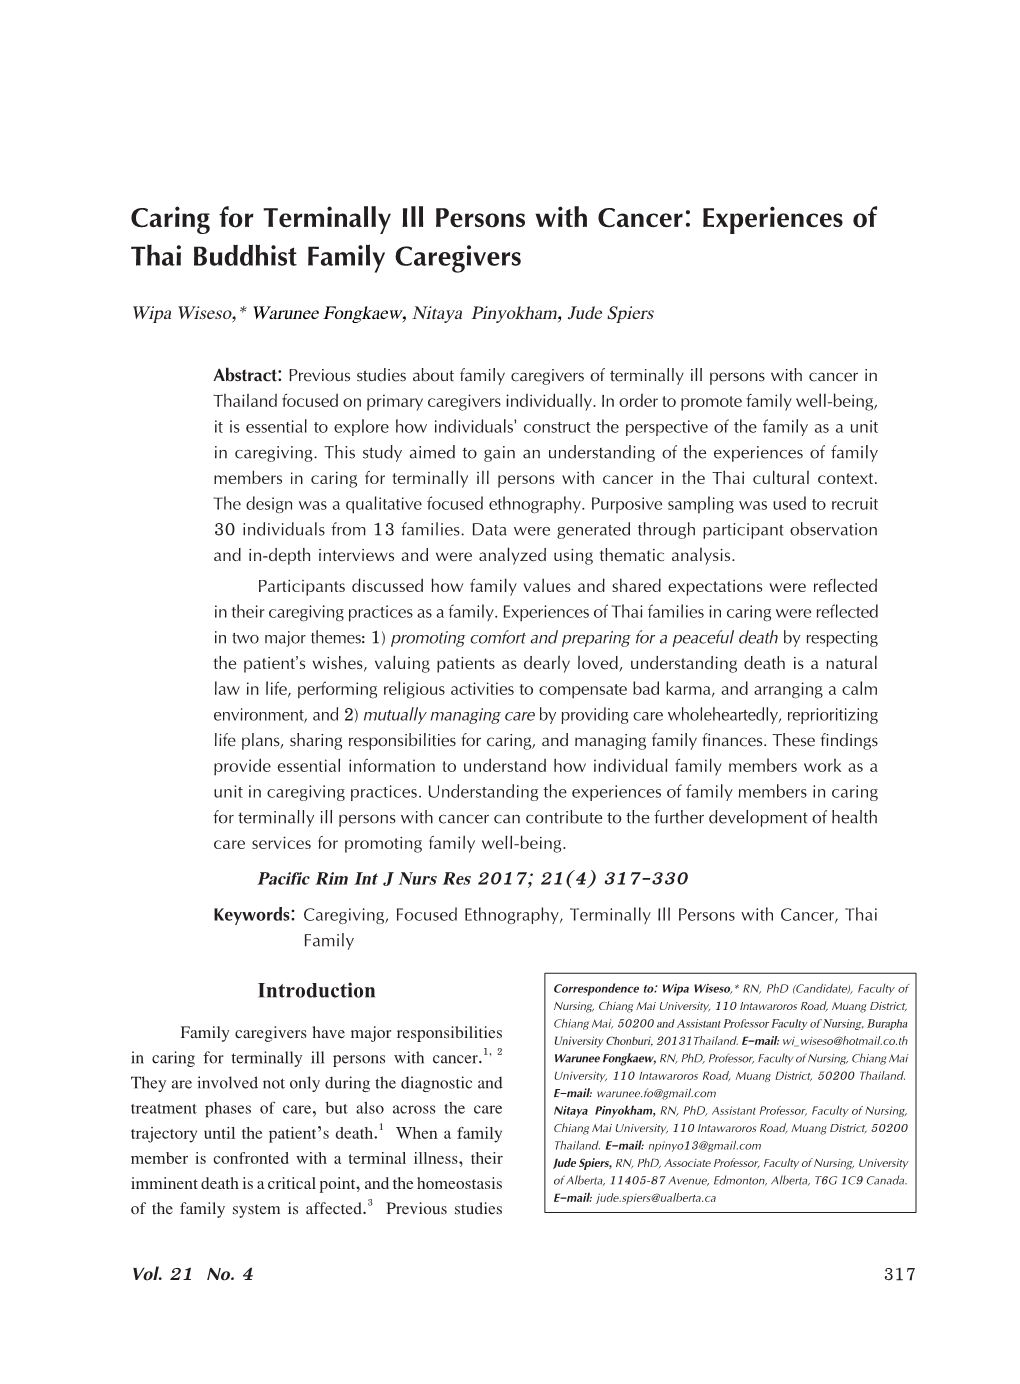 Caring for Terminally Ill Persons with Cancer: Experiences of Thai Buddhist Family Caregivers Wipa Wiseso,* Warunee Fongkaew, Nitaya Pinyokham, Jude Spiers